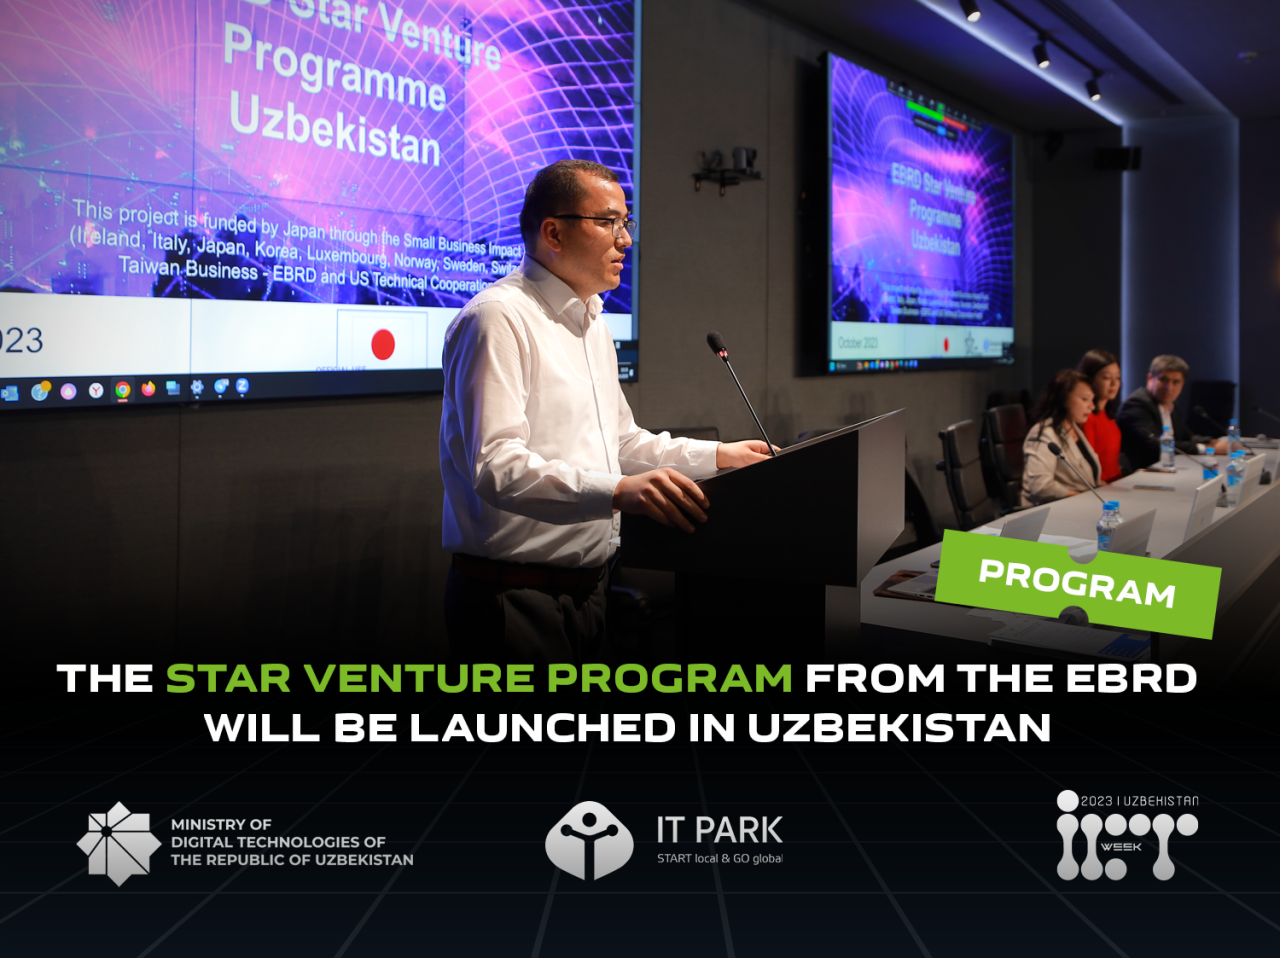 The Star Venture program from the EBRD will be launched in Uzbekistan